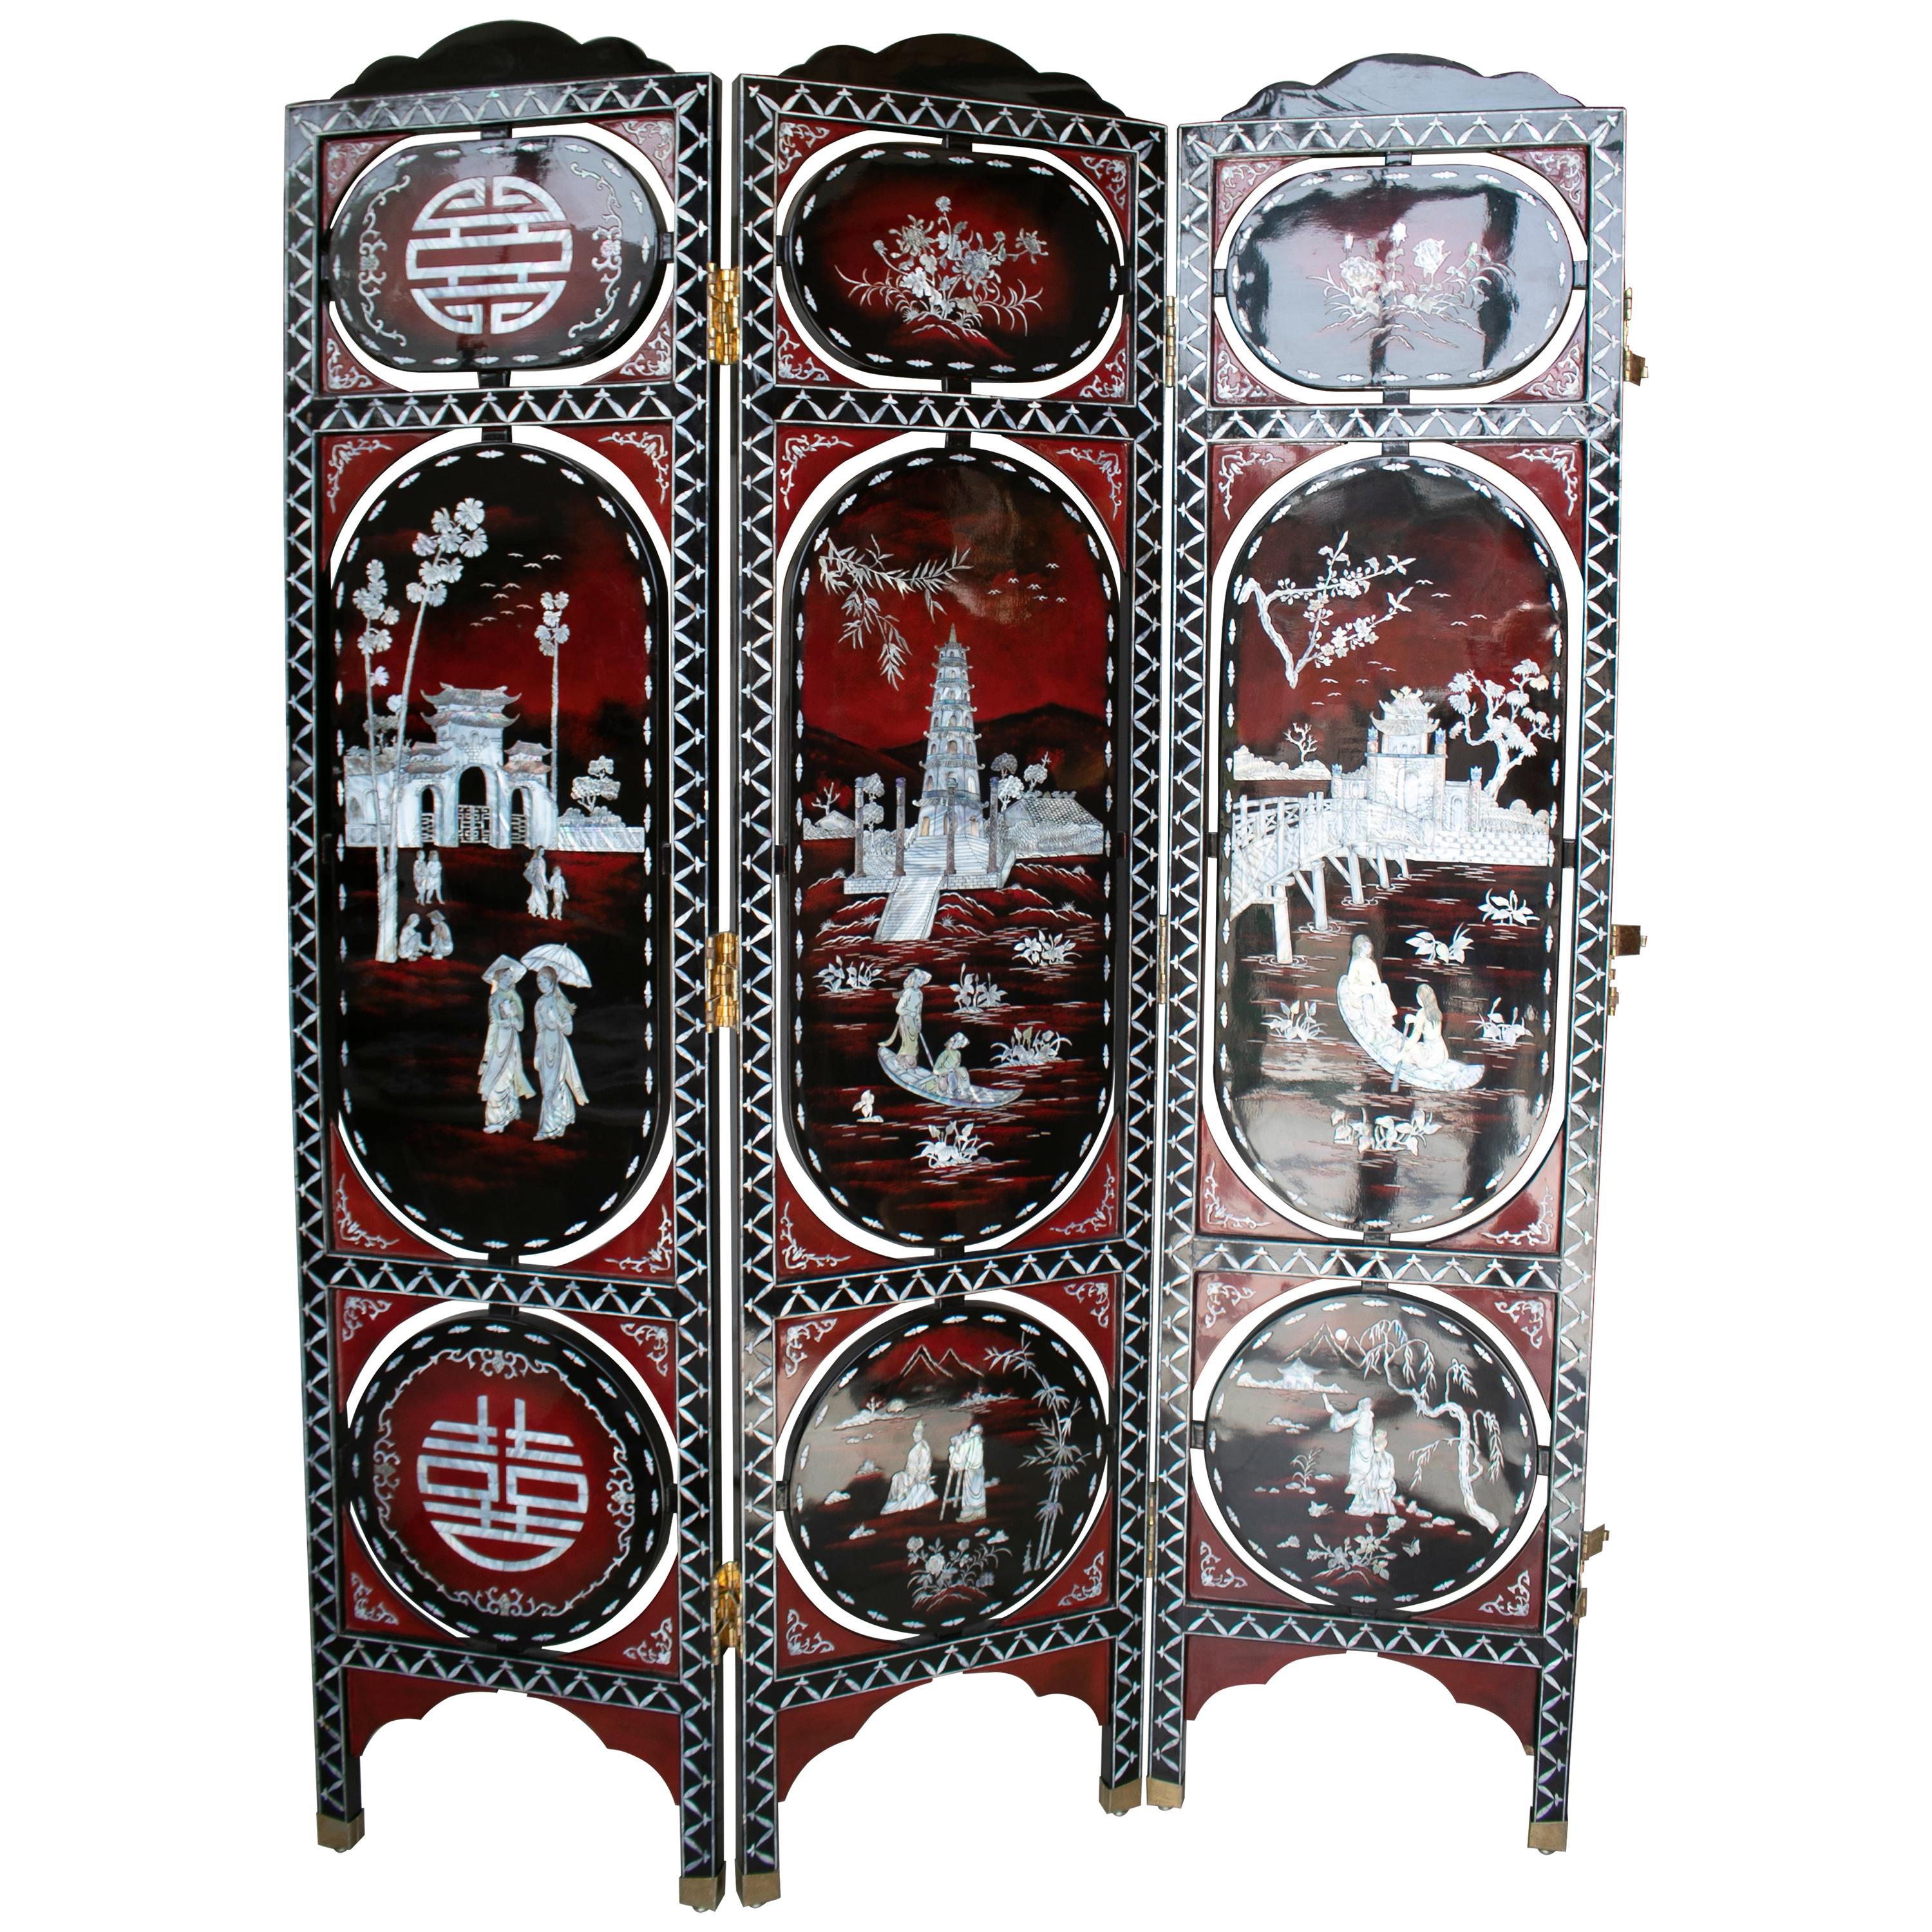 1970s Chinese Lacquered Folding Screen with Nacre Inlay Asian Motifs For Sale